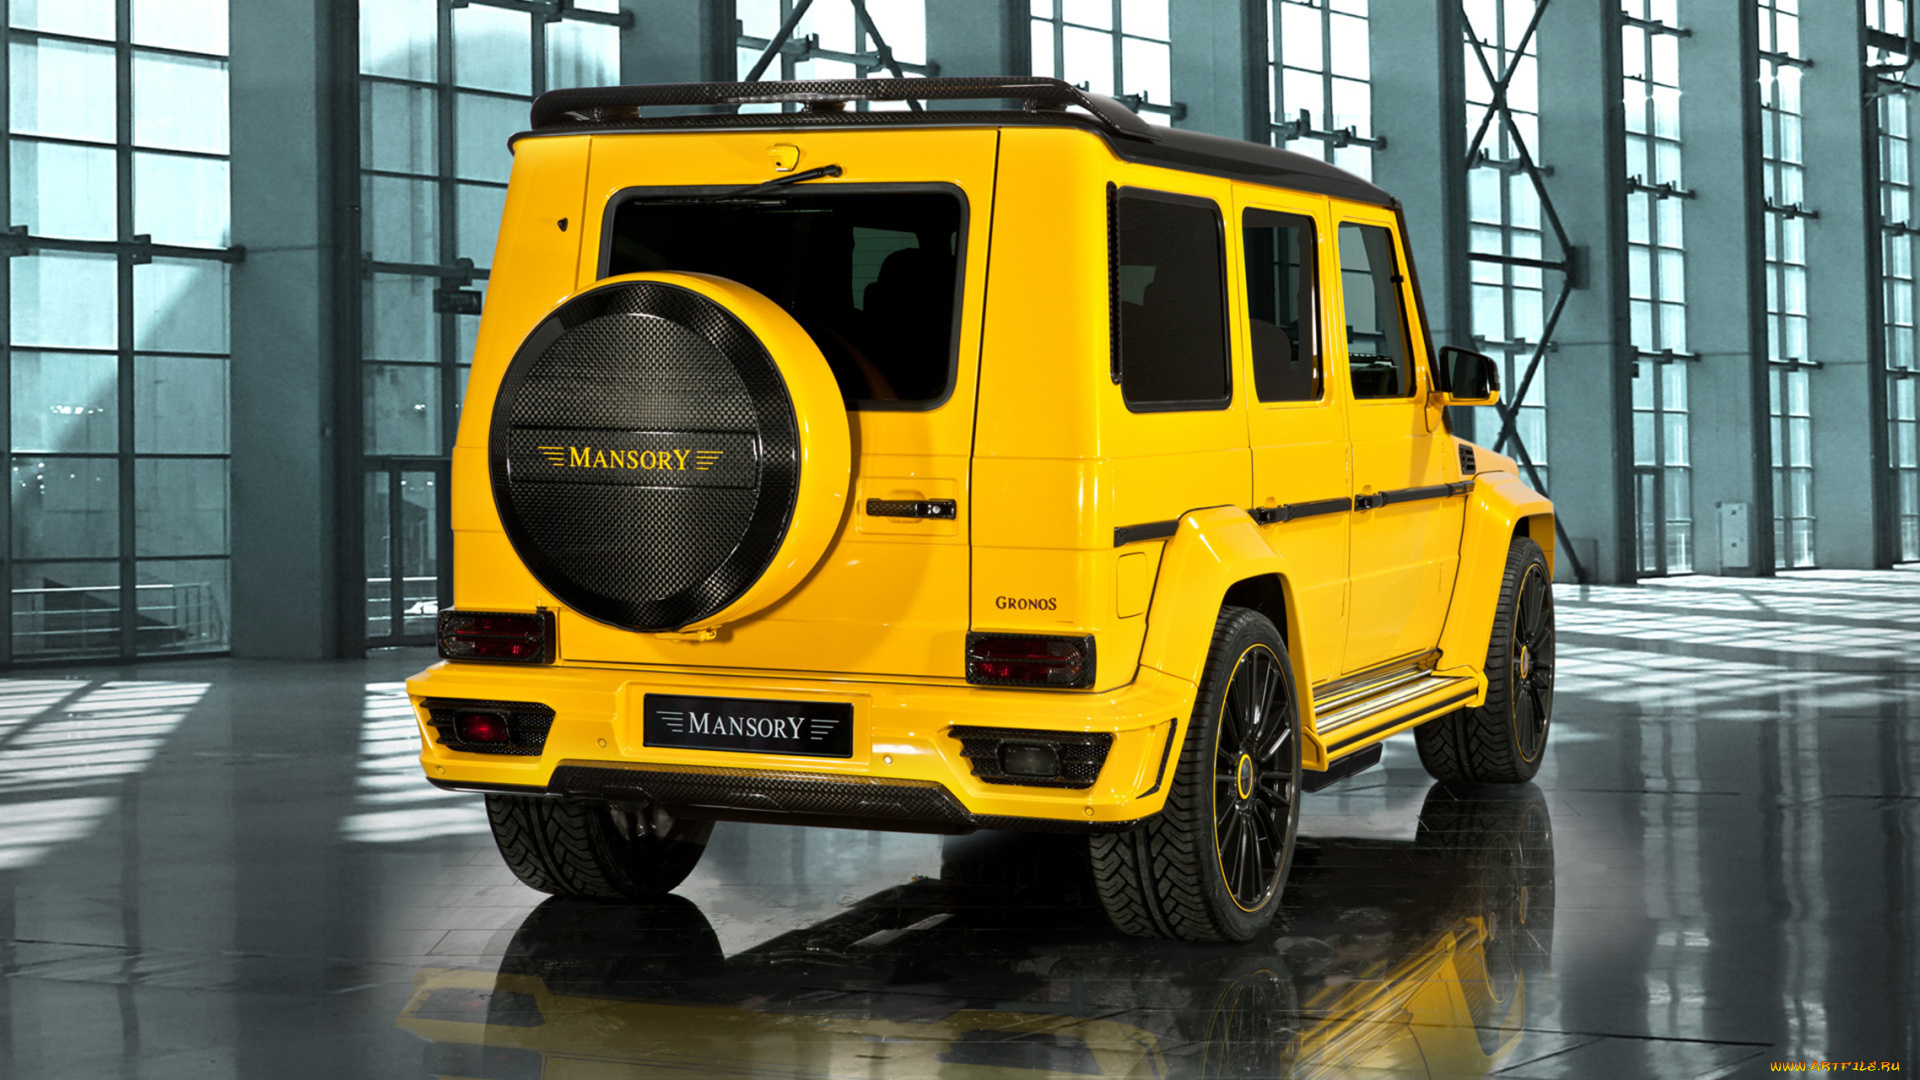 mansory, gronos, based, on, mercedes-benz, g-class, amg, 2013, автомобили, mercedes-benz, mansory, gronos, based, g-class, amg, 2013